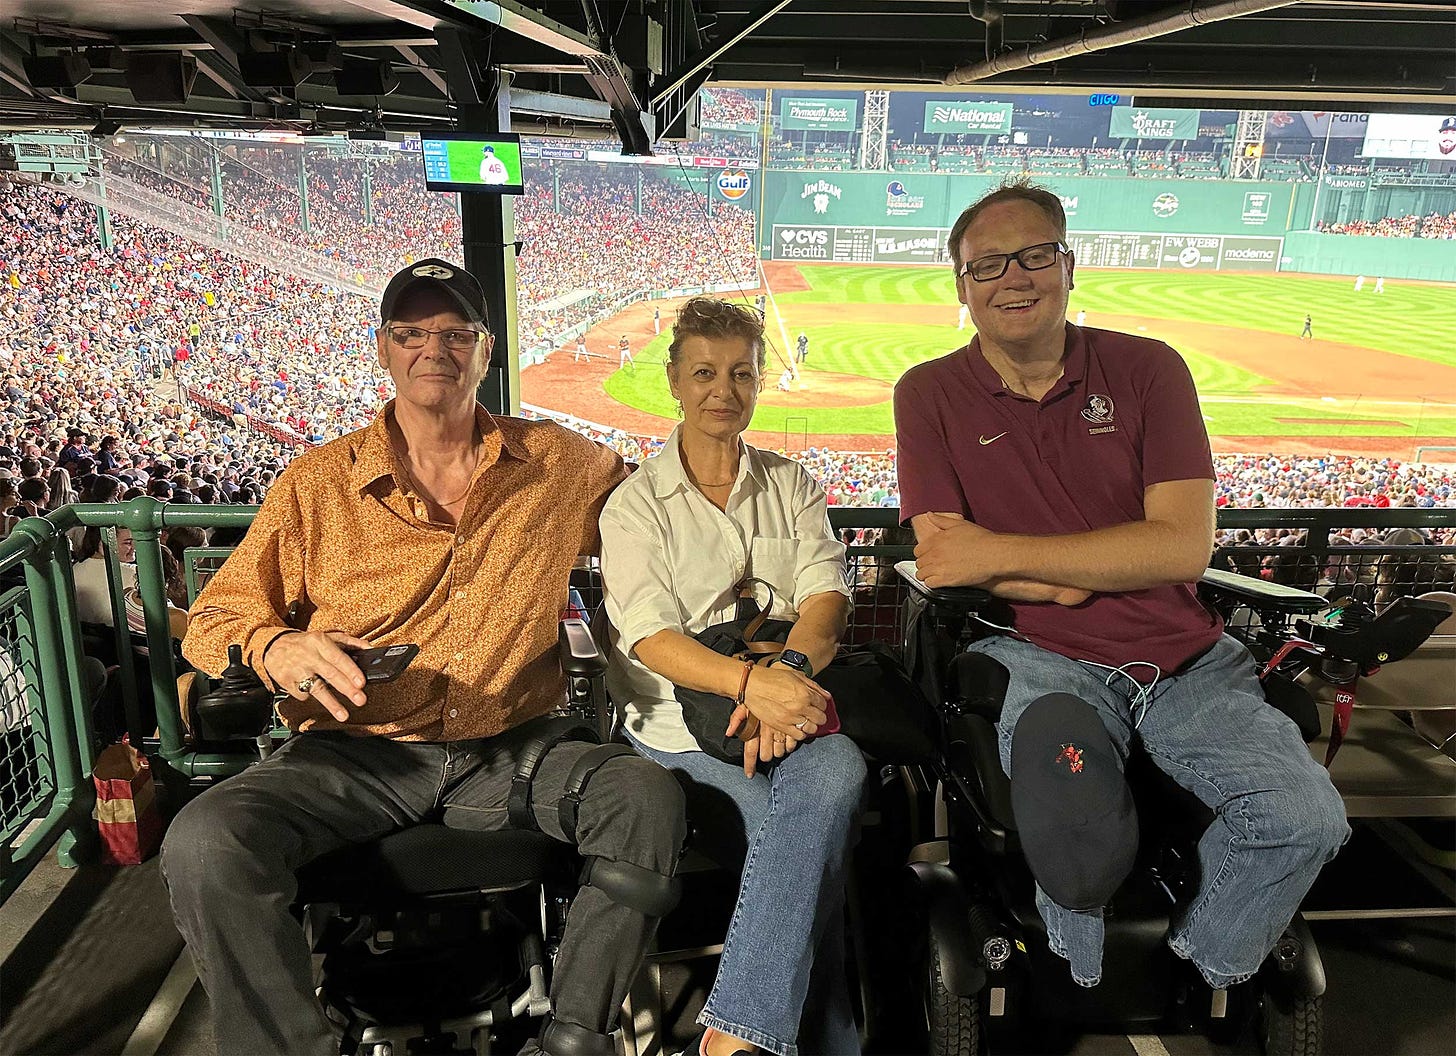 John seated in his wheelchair next to two readers inside baseball park.